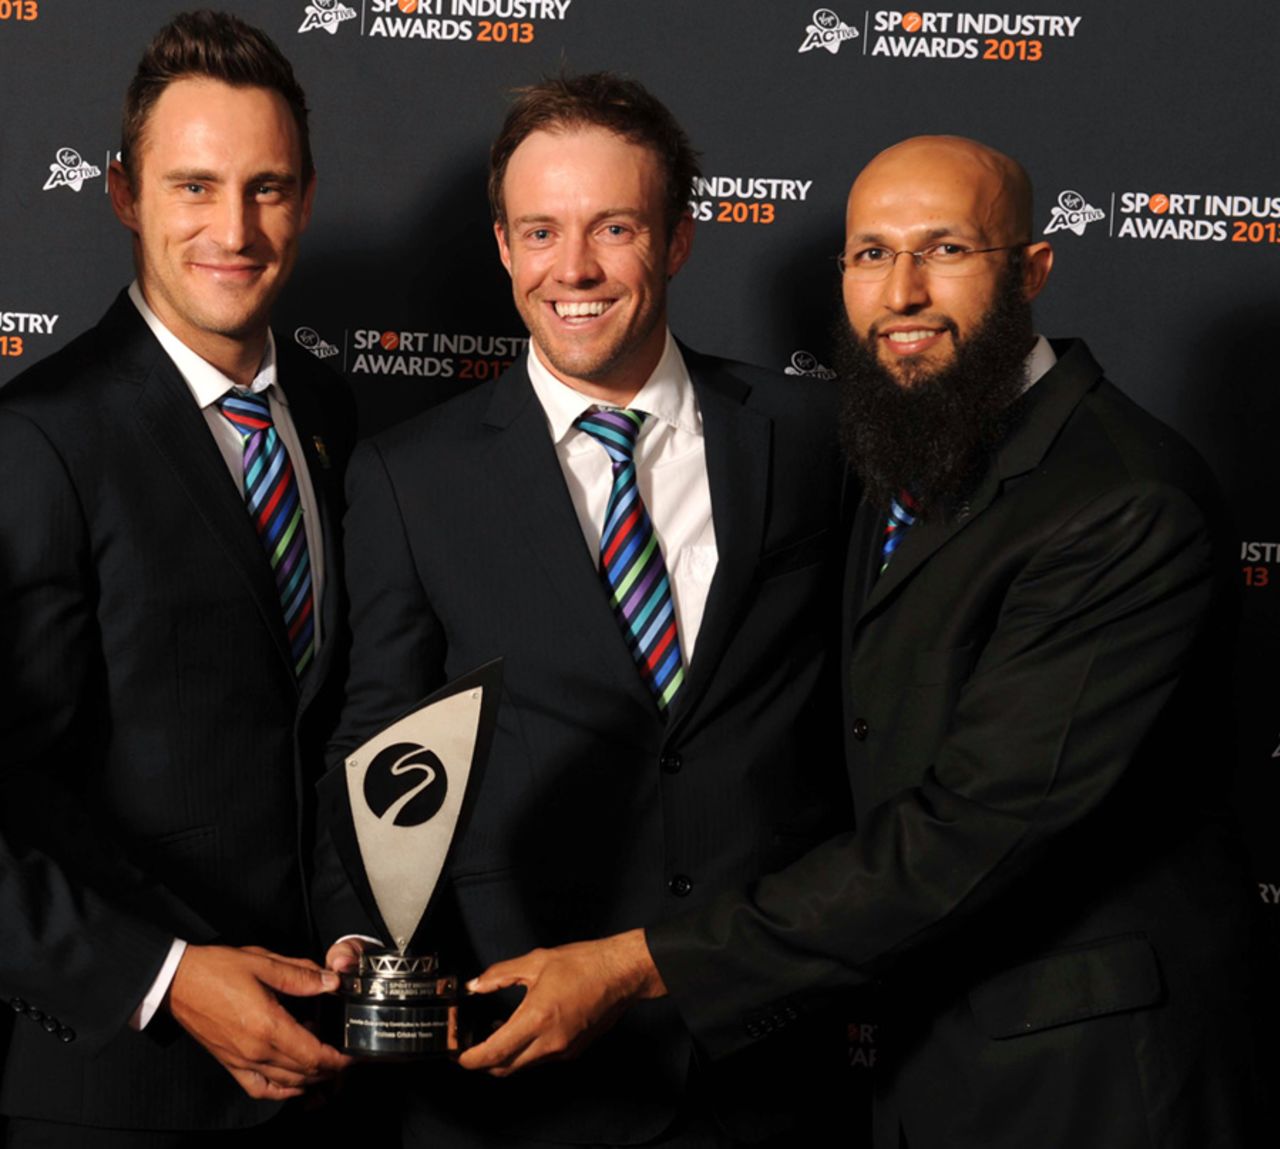 Faf du Plessis, AB de Villiers and Hashim Amla with the Deloitte Outstanding Contribution to South African Sport Award during the Virgin Active Sport Industry Awards in Johannesburg, February 7, 2013